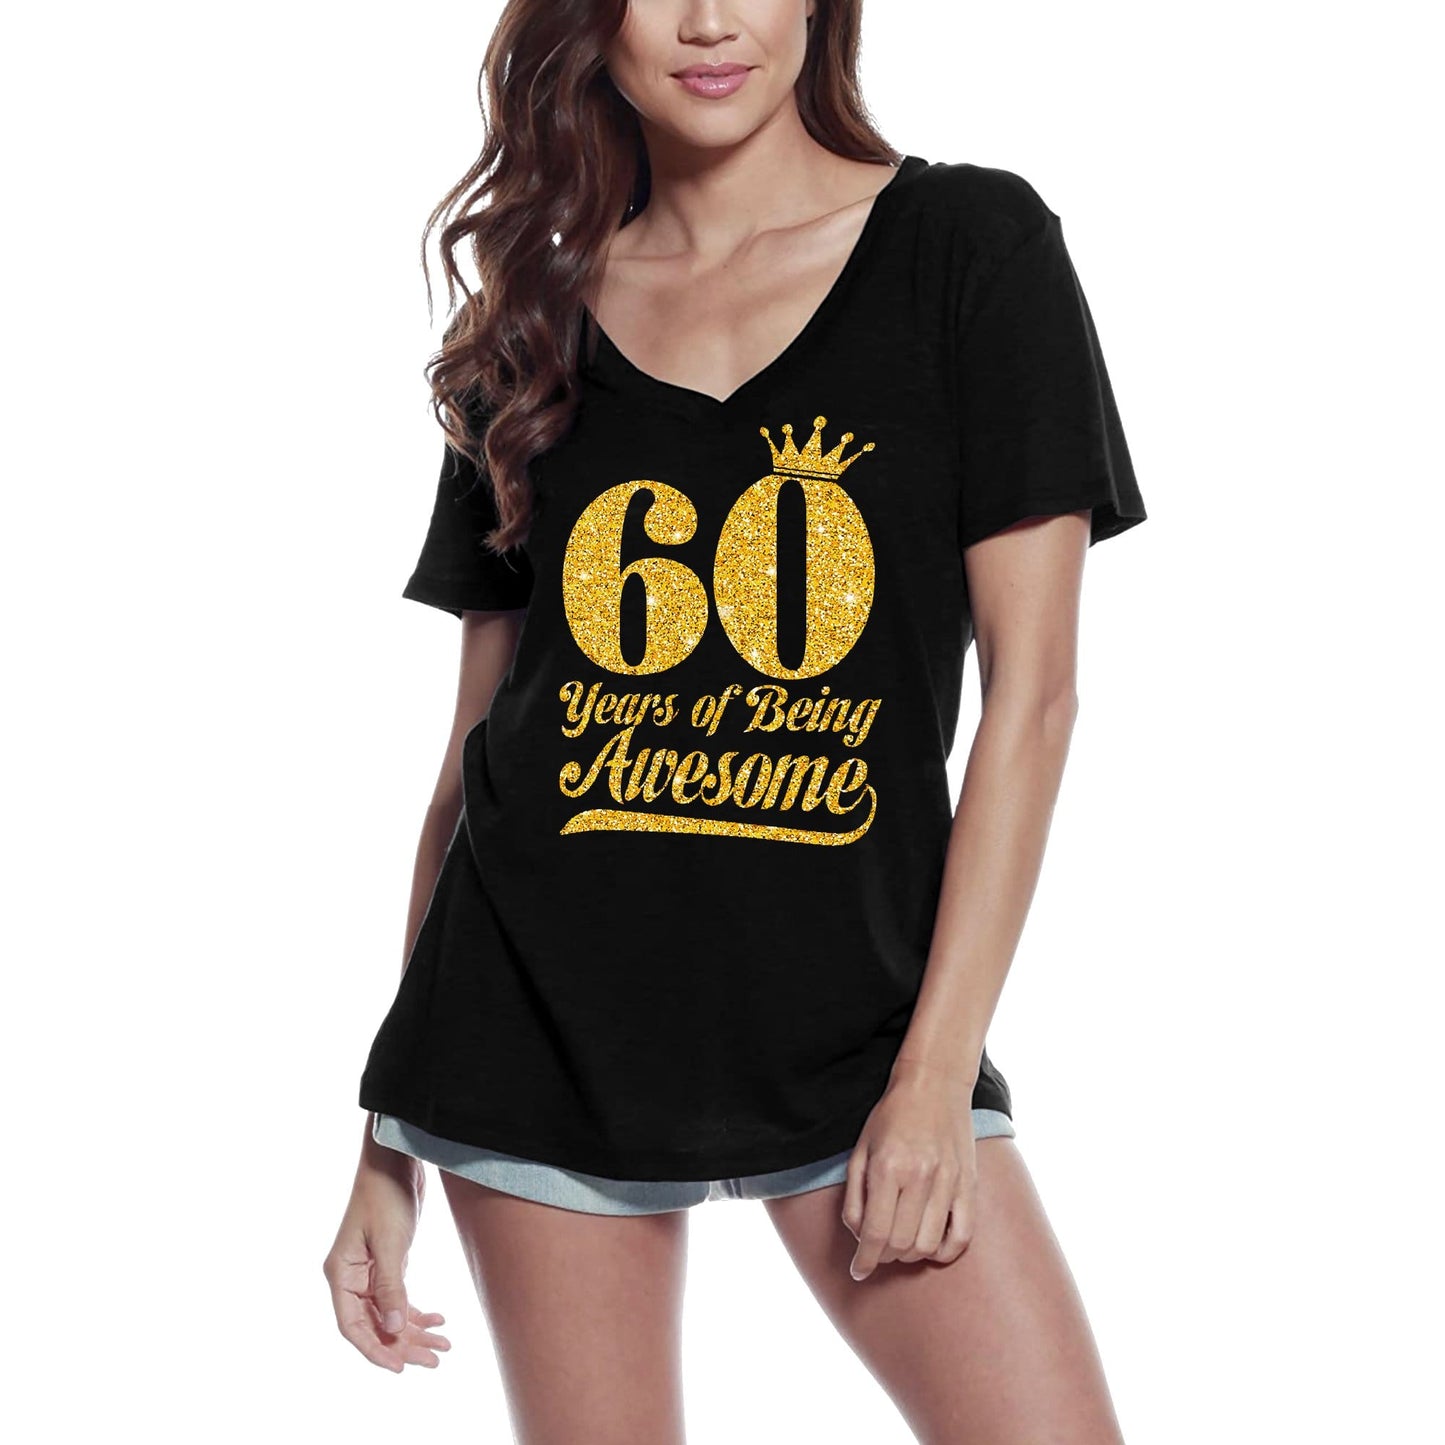 ULTRABASIC Women's T-Shirt 60 Years of Being Awesome - 60th Birthday Shirt for Ladies